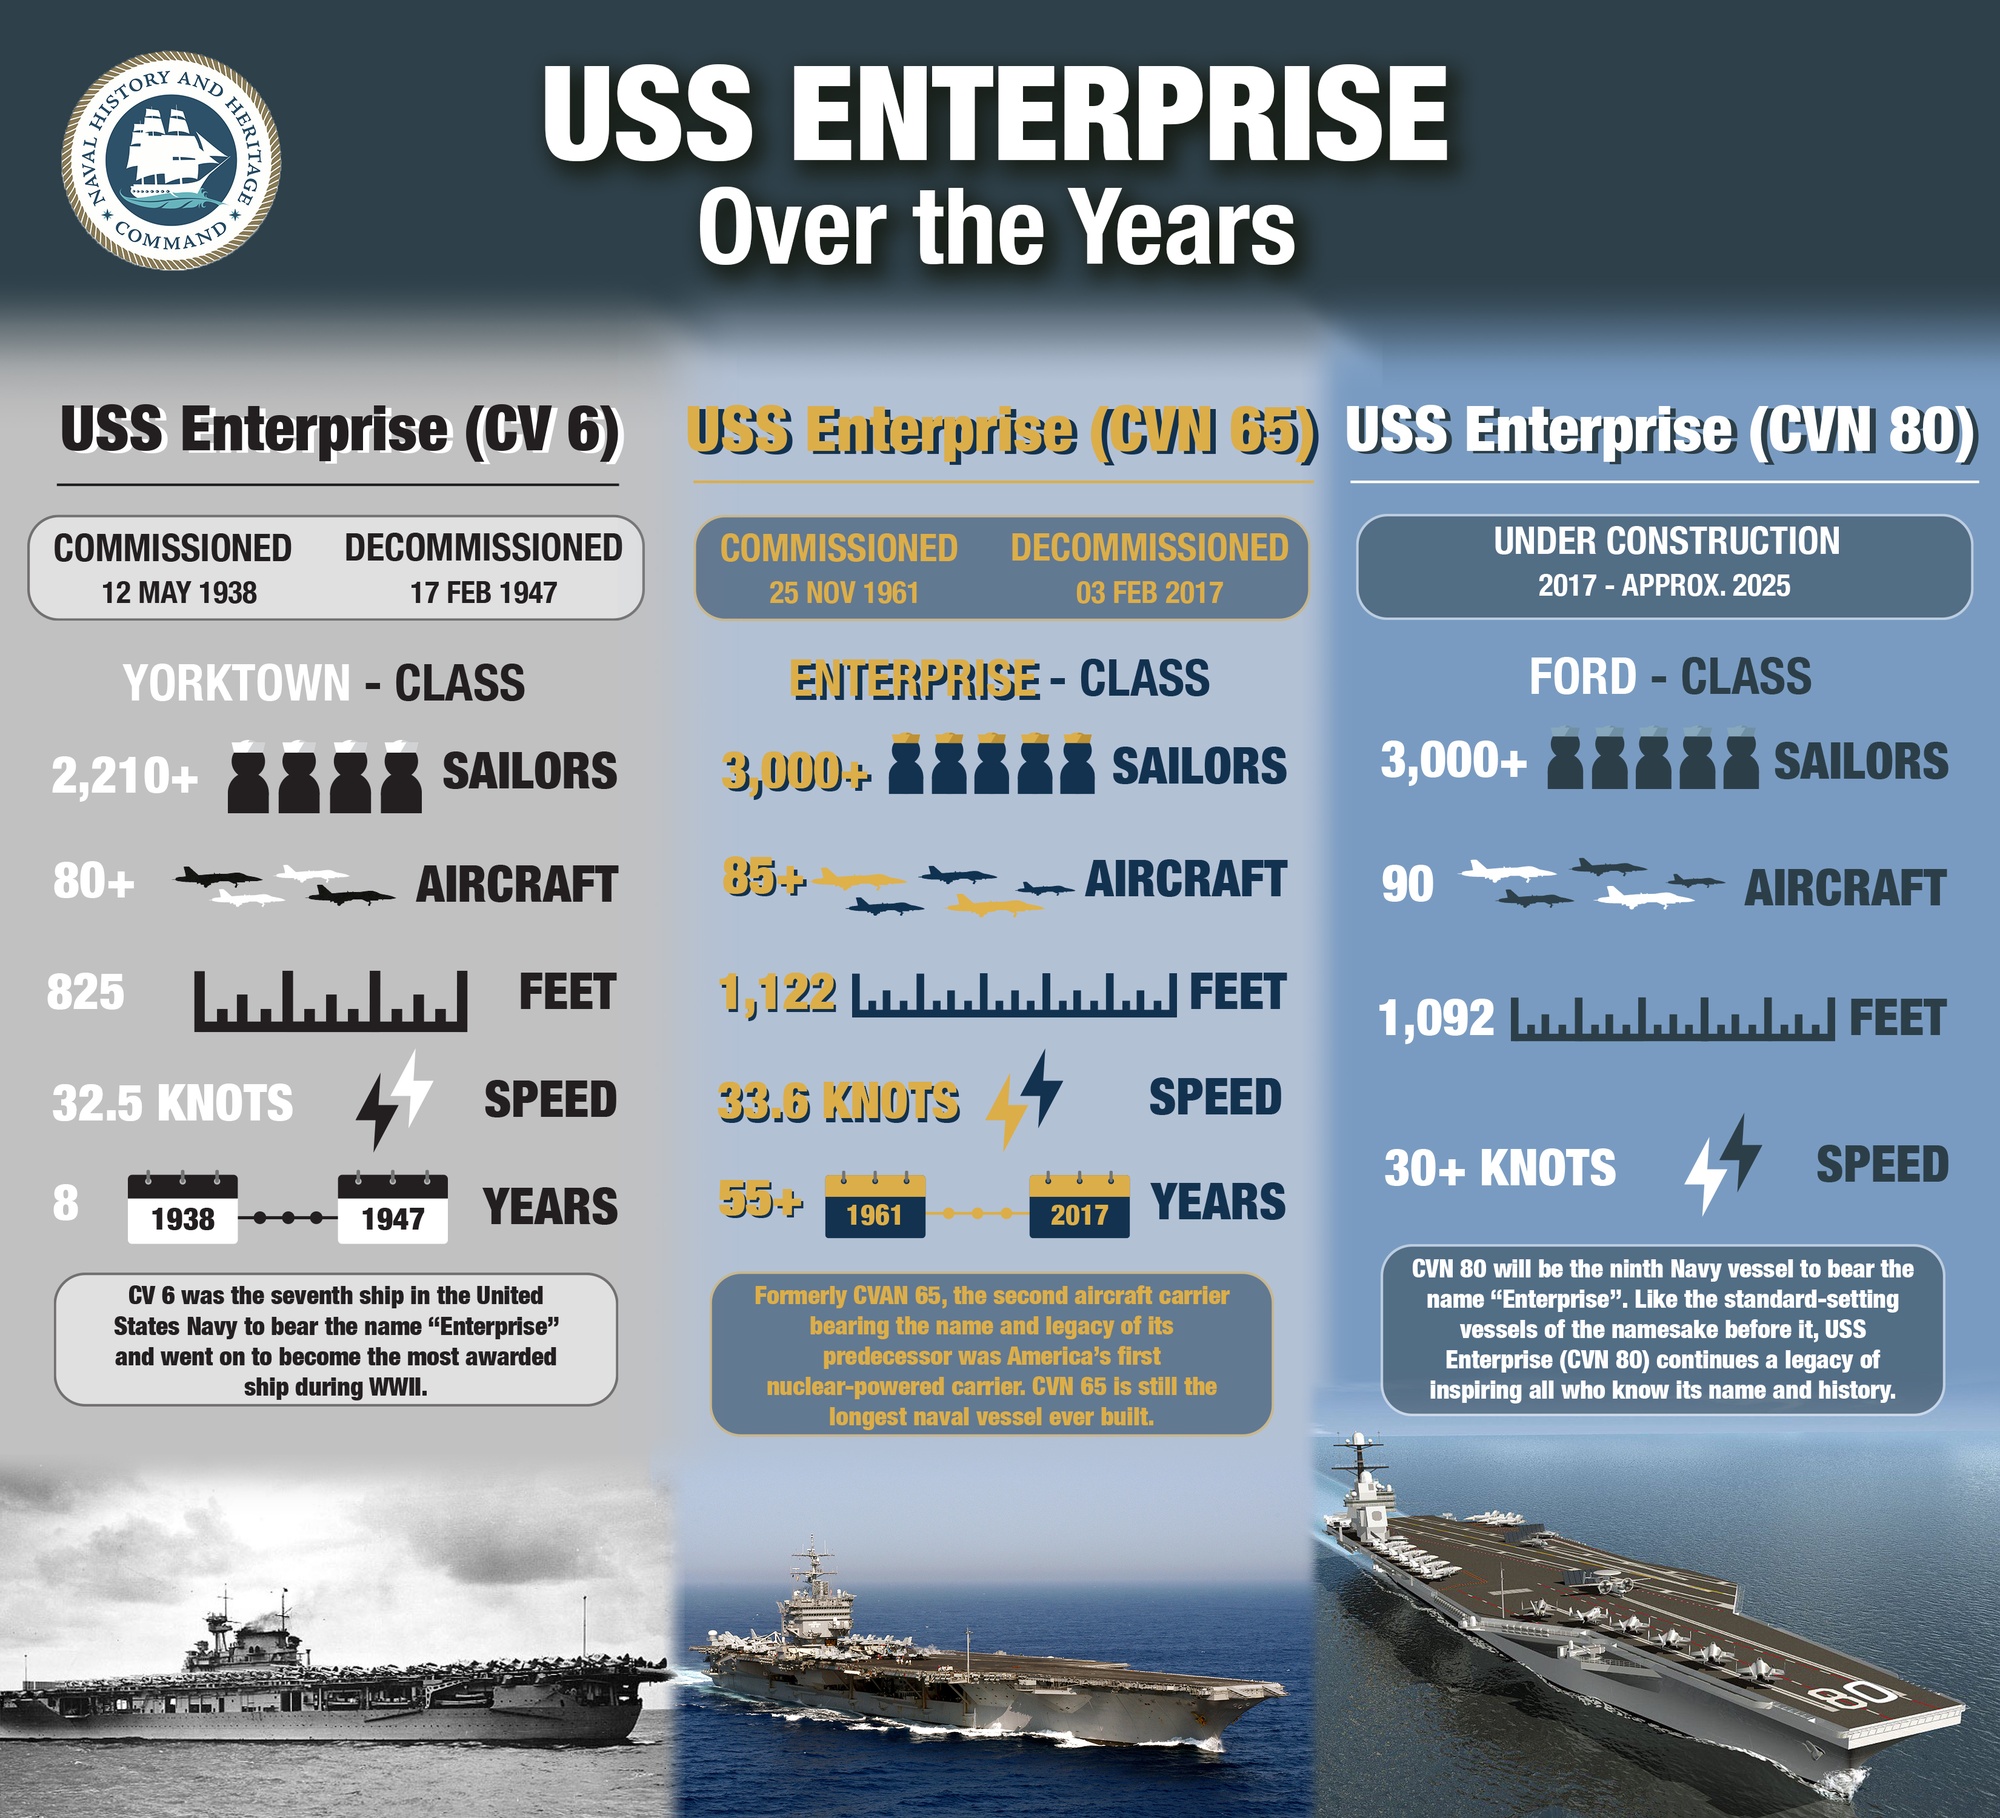 DVIDS - Images - USS Enterprise over the Years